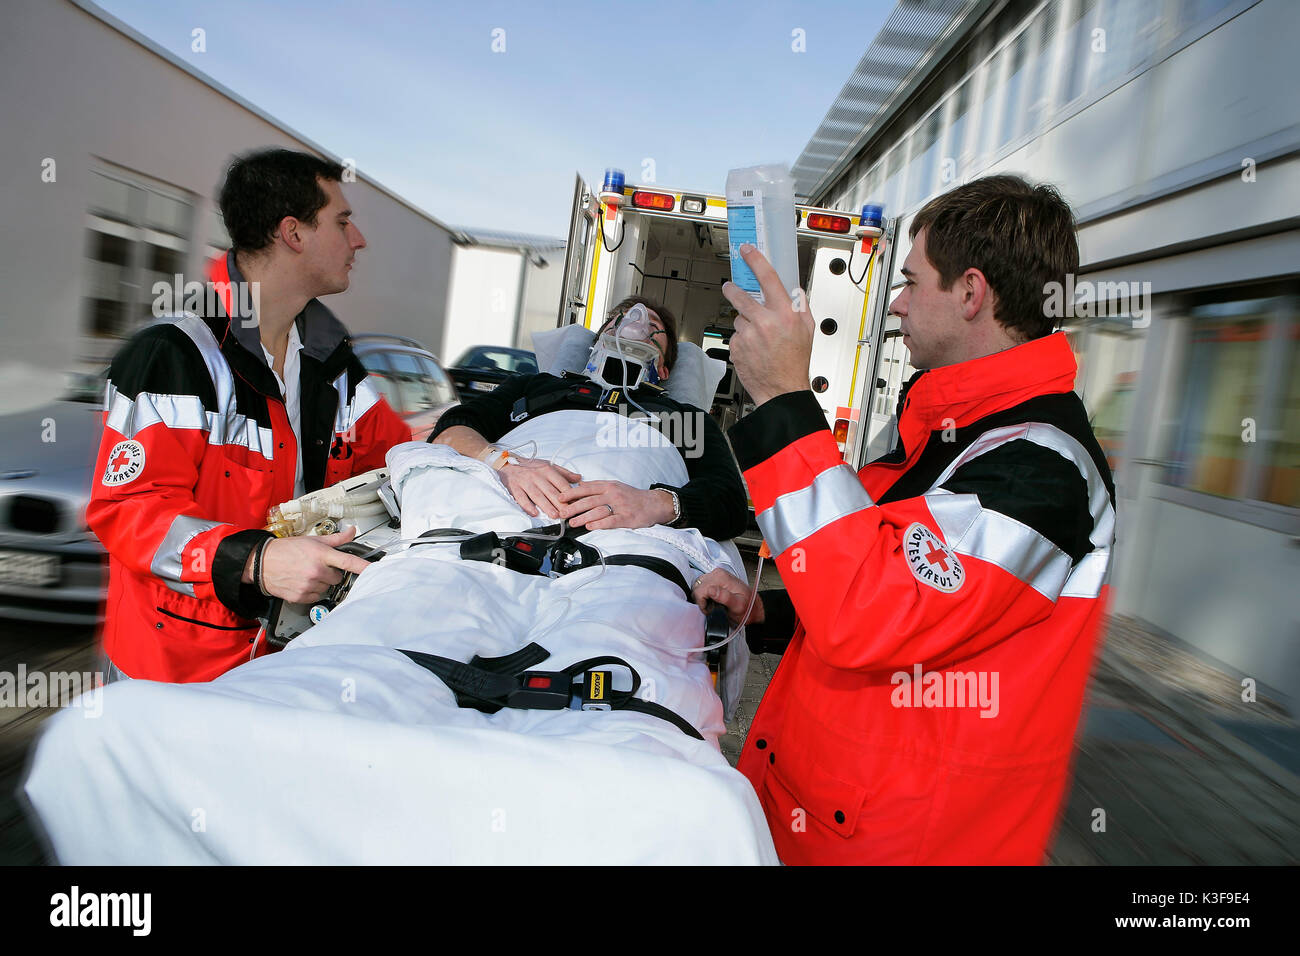 Paramedic in use Stock Photo